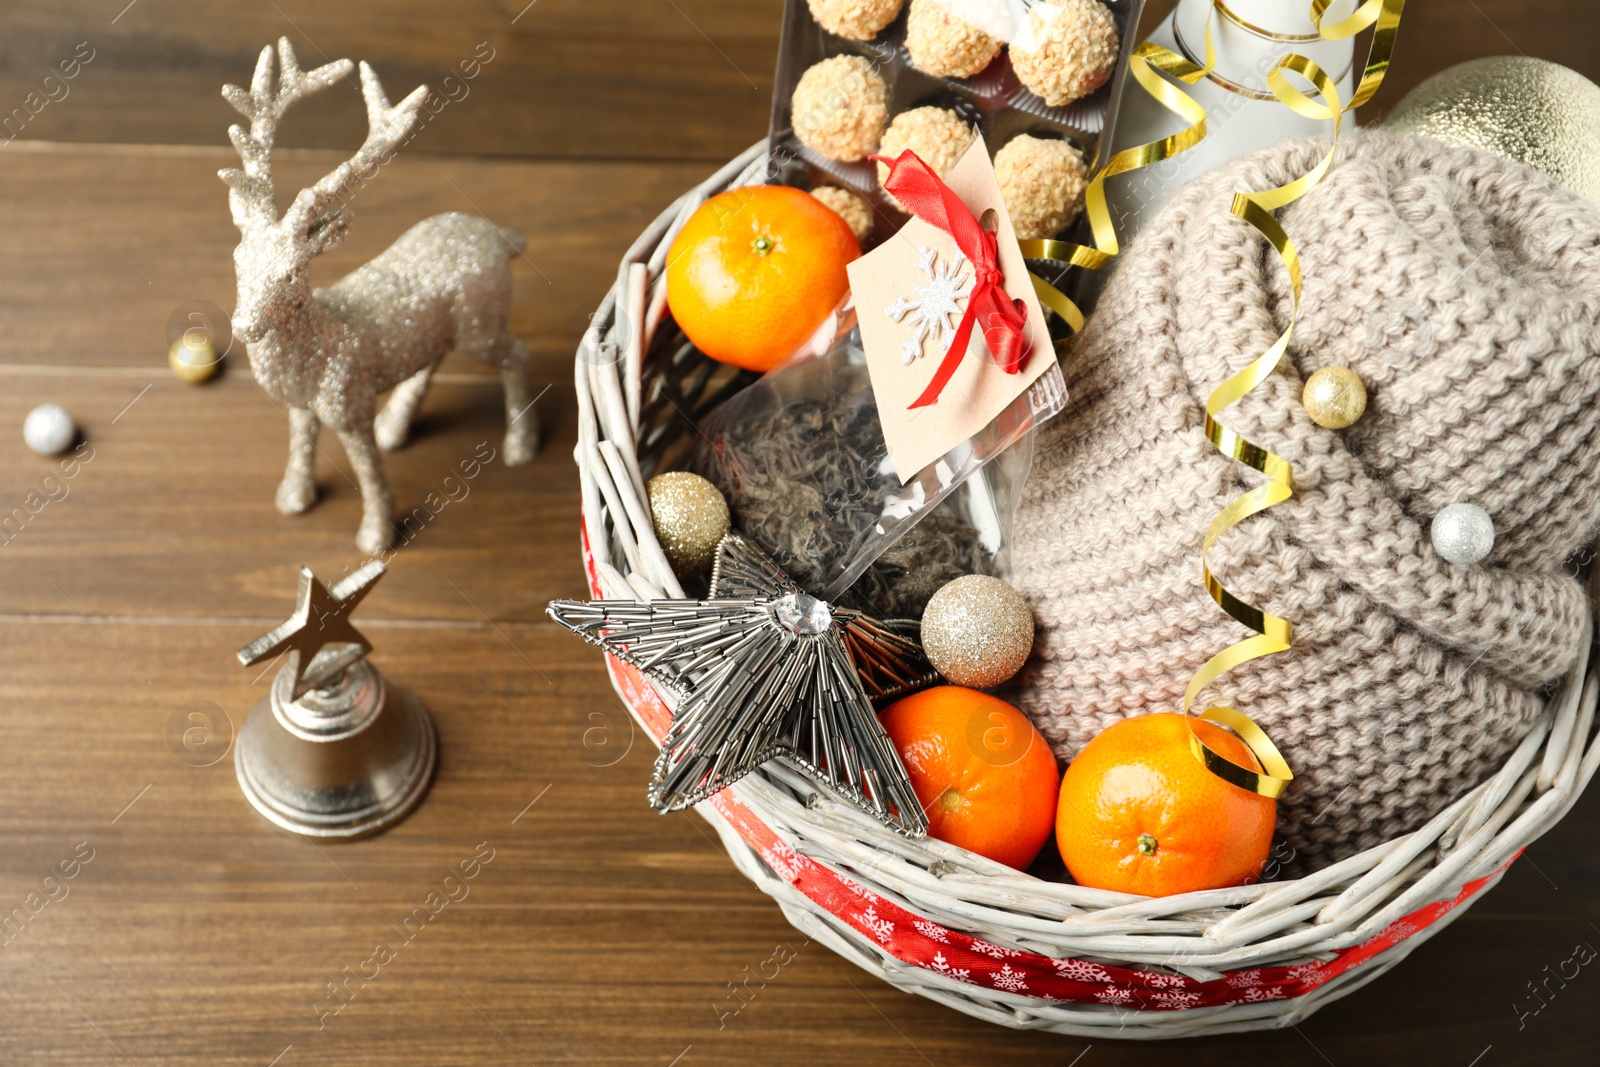 Photo of Wicker basket with gift set and Christmas decor on wooden table